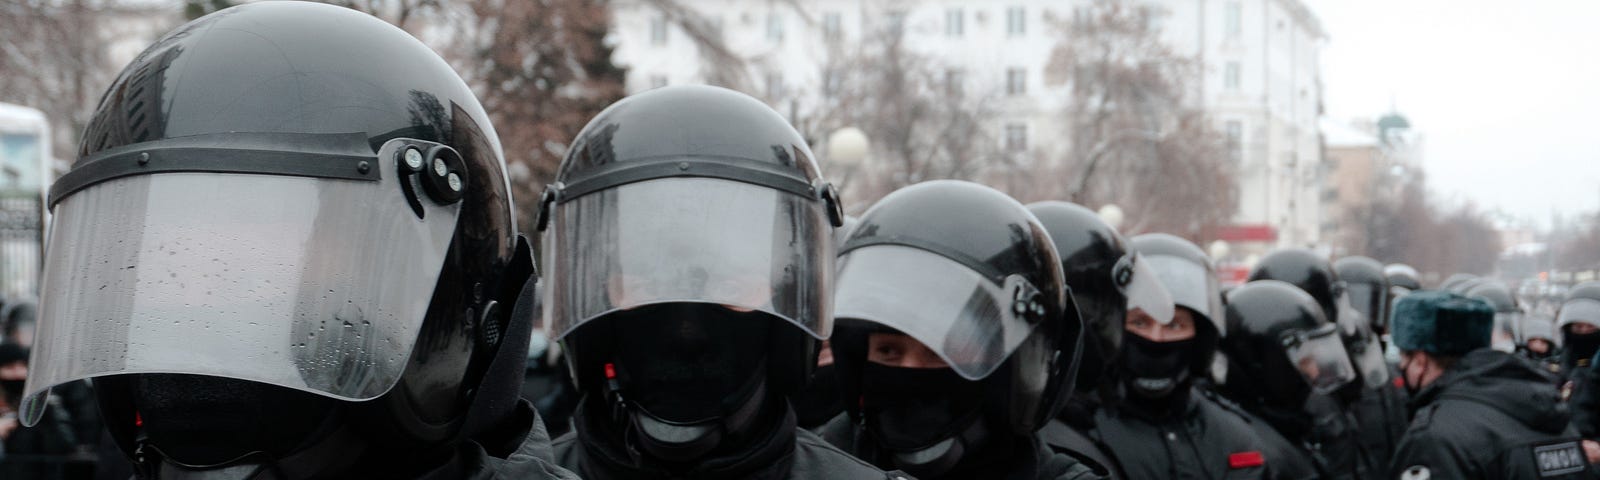 Police forces dressed in black with helmets.